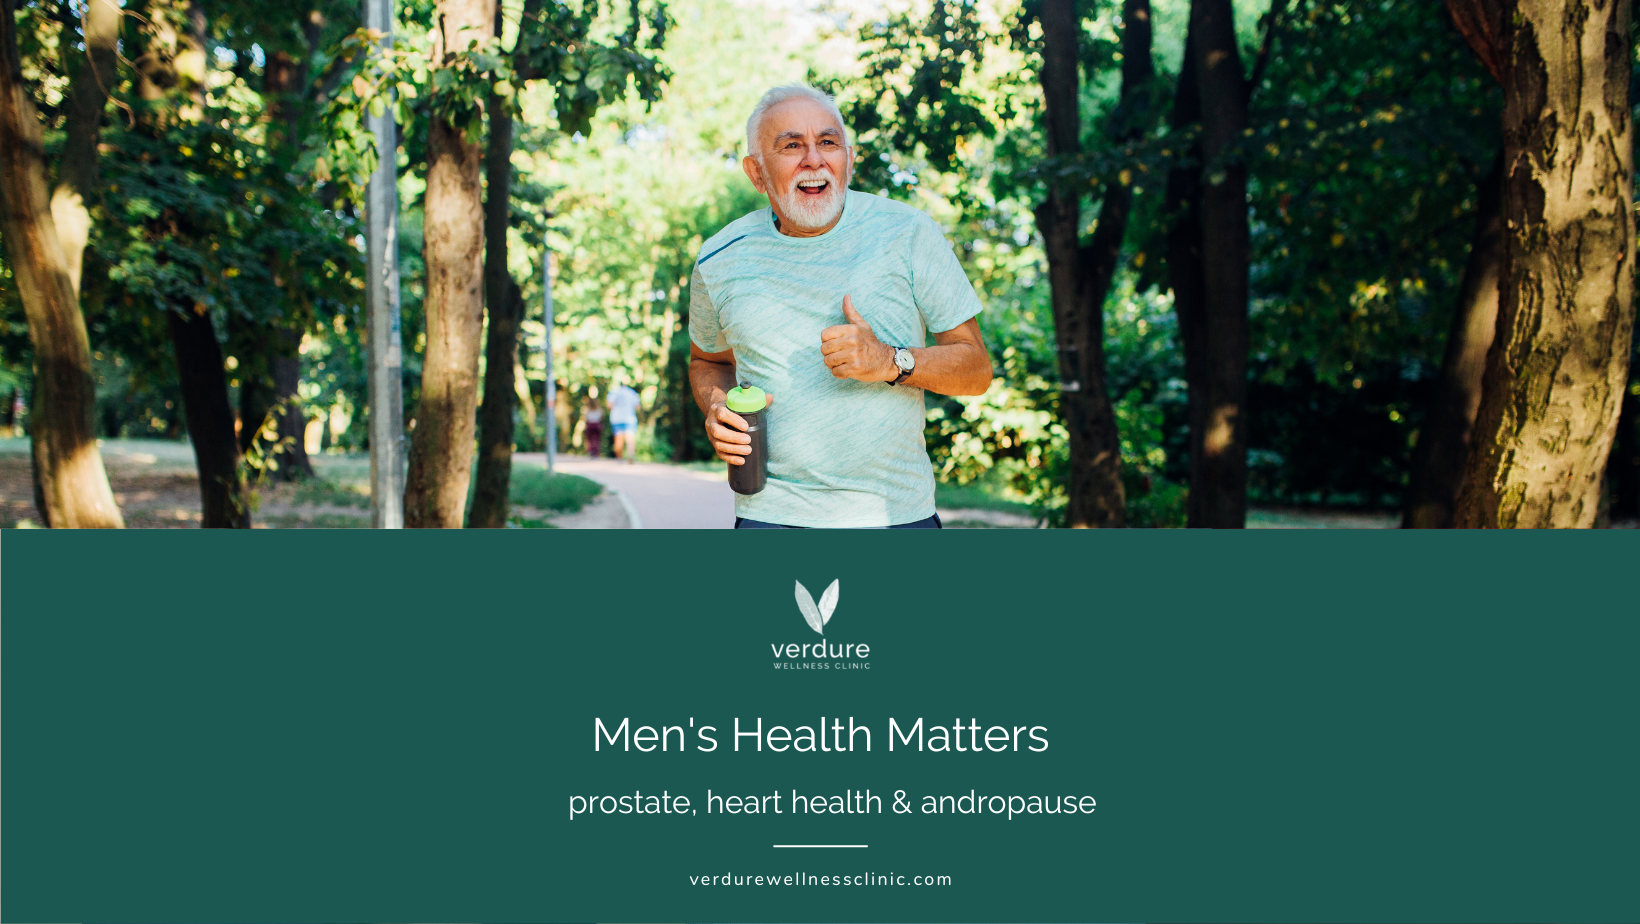 men's health matters prostate, heart health & andropause